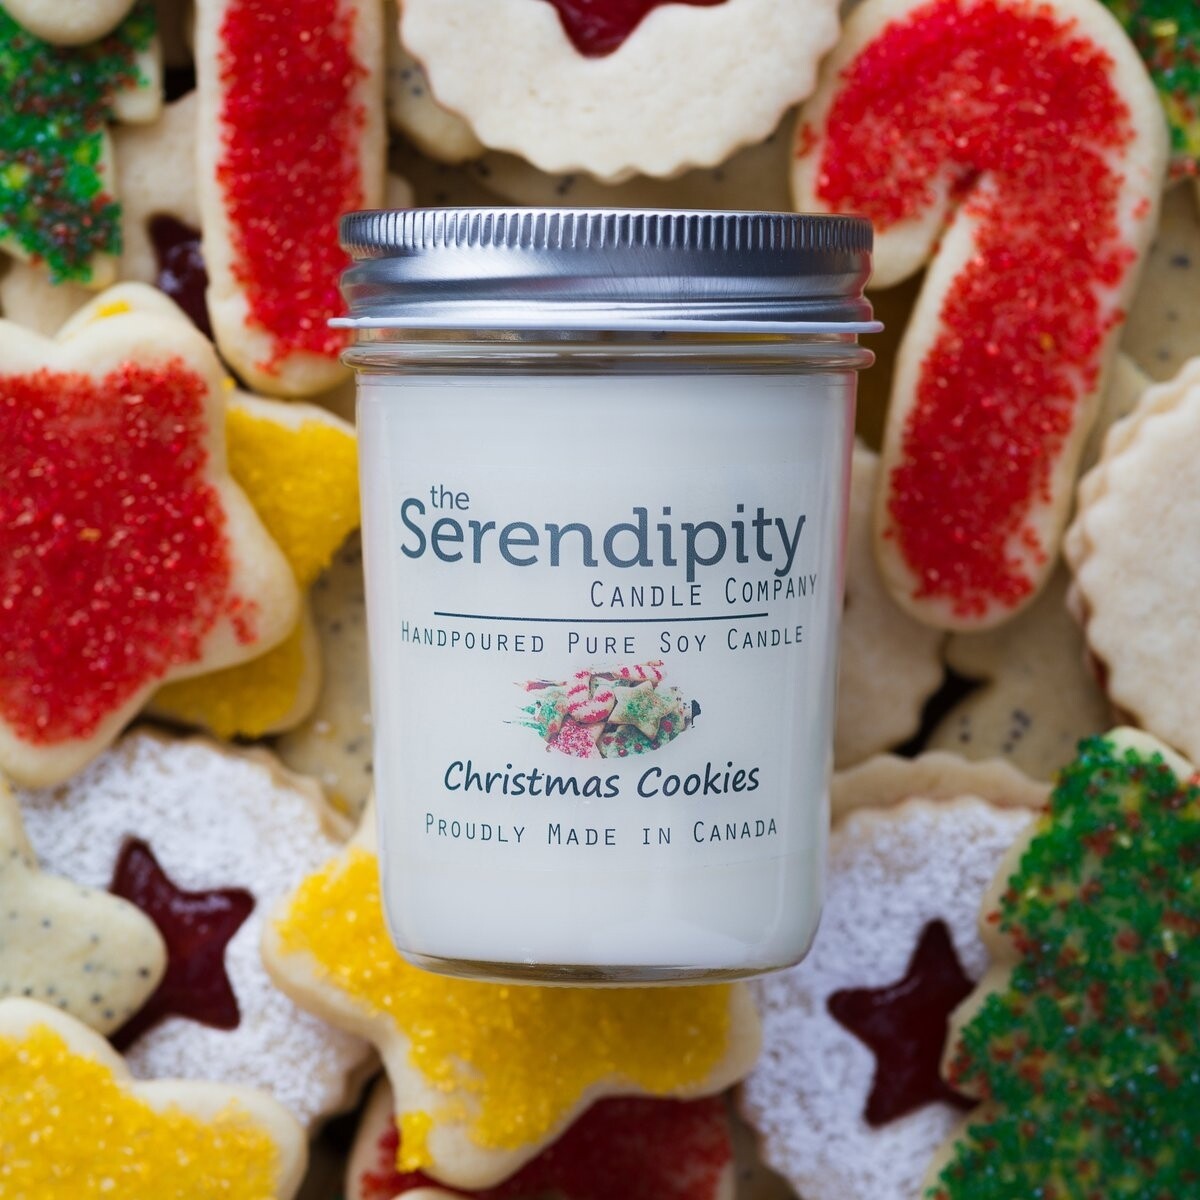 Serendipity 8 oz Soy Candle Jar | Christmas Cookies